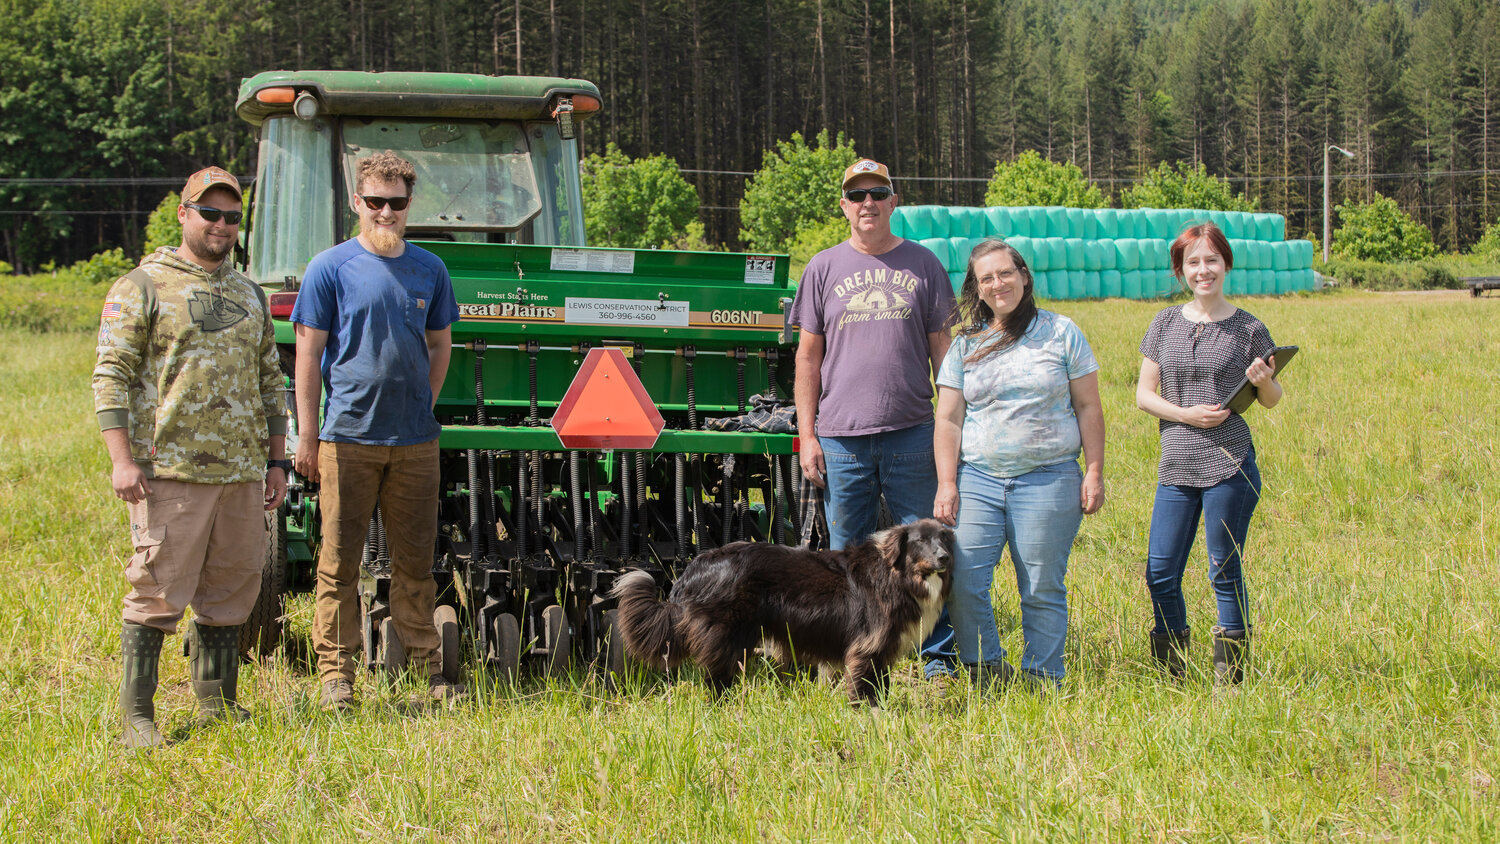 From left, Veterans Conservation Corps Intern Chris Volmert, fourth-generation dairy farmer Jack Mallonee and his father Maynard Mallonee, English shepherd Turbo, Lewis Conservation District Special Projects Coordinator Kelly Verd, and Outreach Coordinator Kenna Fosnacht pose for a photo in front of a no-till seed driller available for a limited time at $5 per acre.